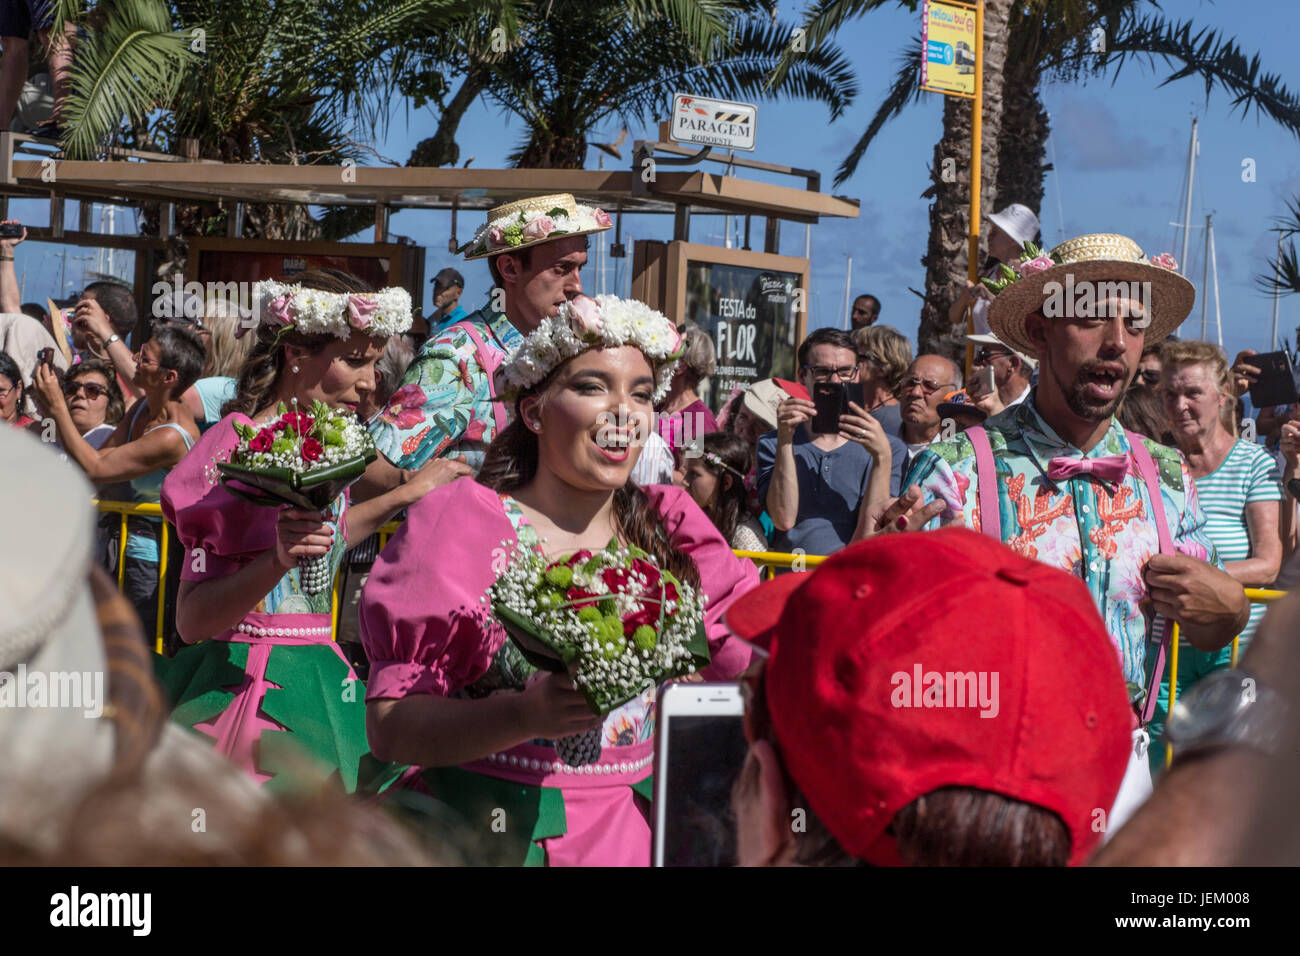 Floats at the 2017 Madeira Flower Festival held in Funchal, Portugal. Stock Photo